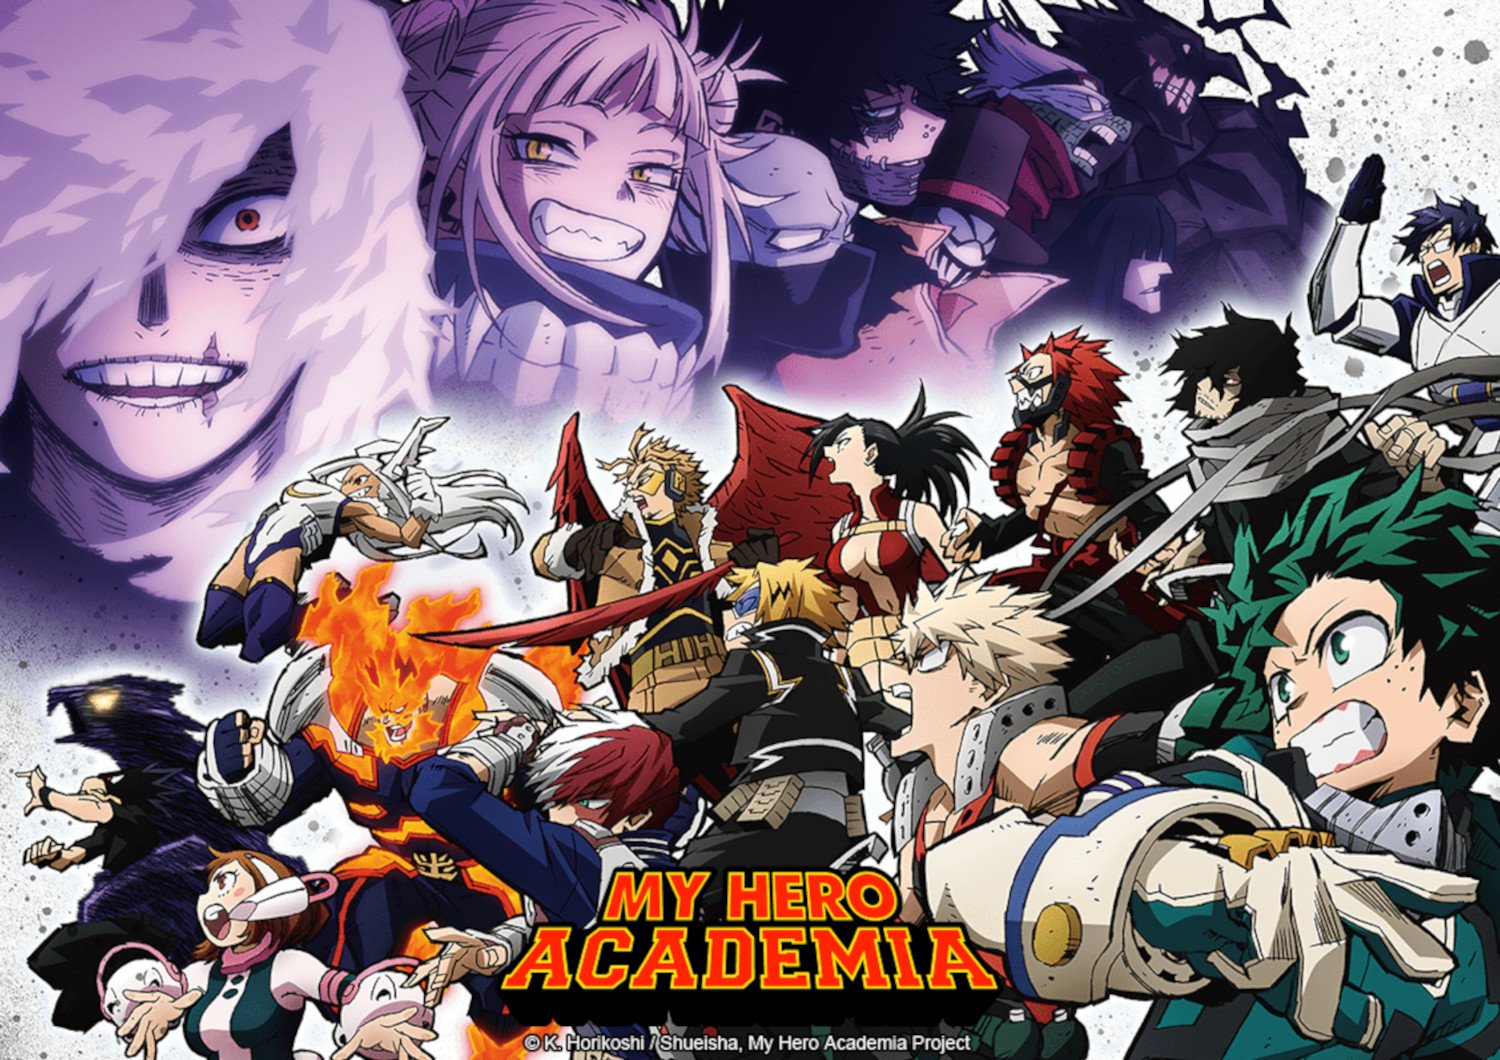 Key art for 'My Hero Academia' Season 6 for our article about how its ending theme teases a major Dabi moment from the manga. It features the Pro Heroes diving into battle on the bottom and the villains hovering above them.